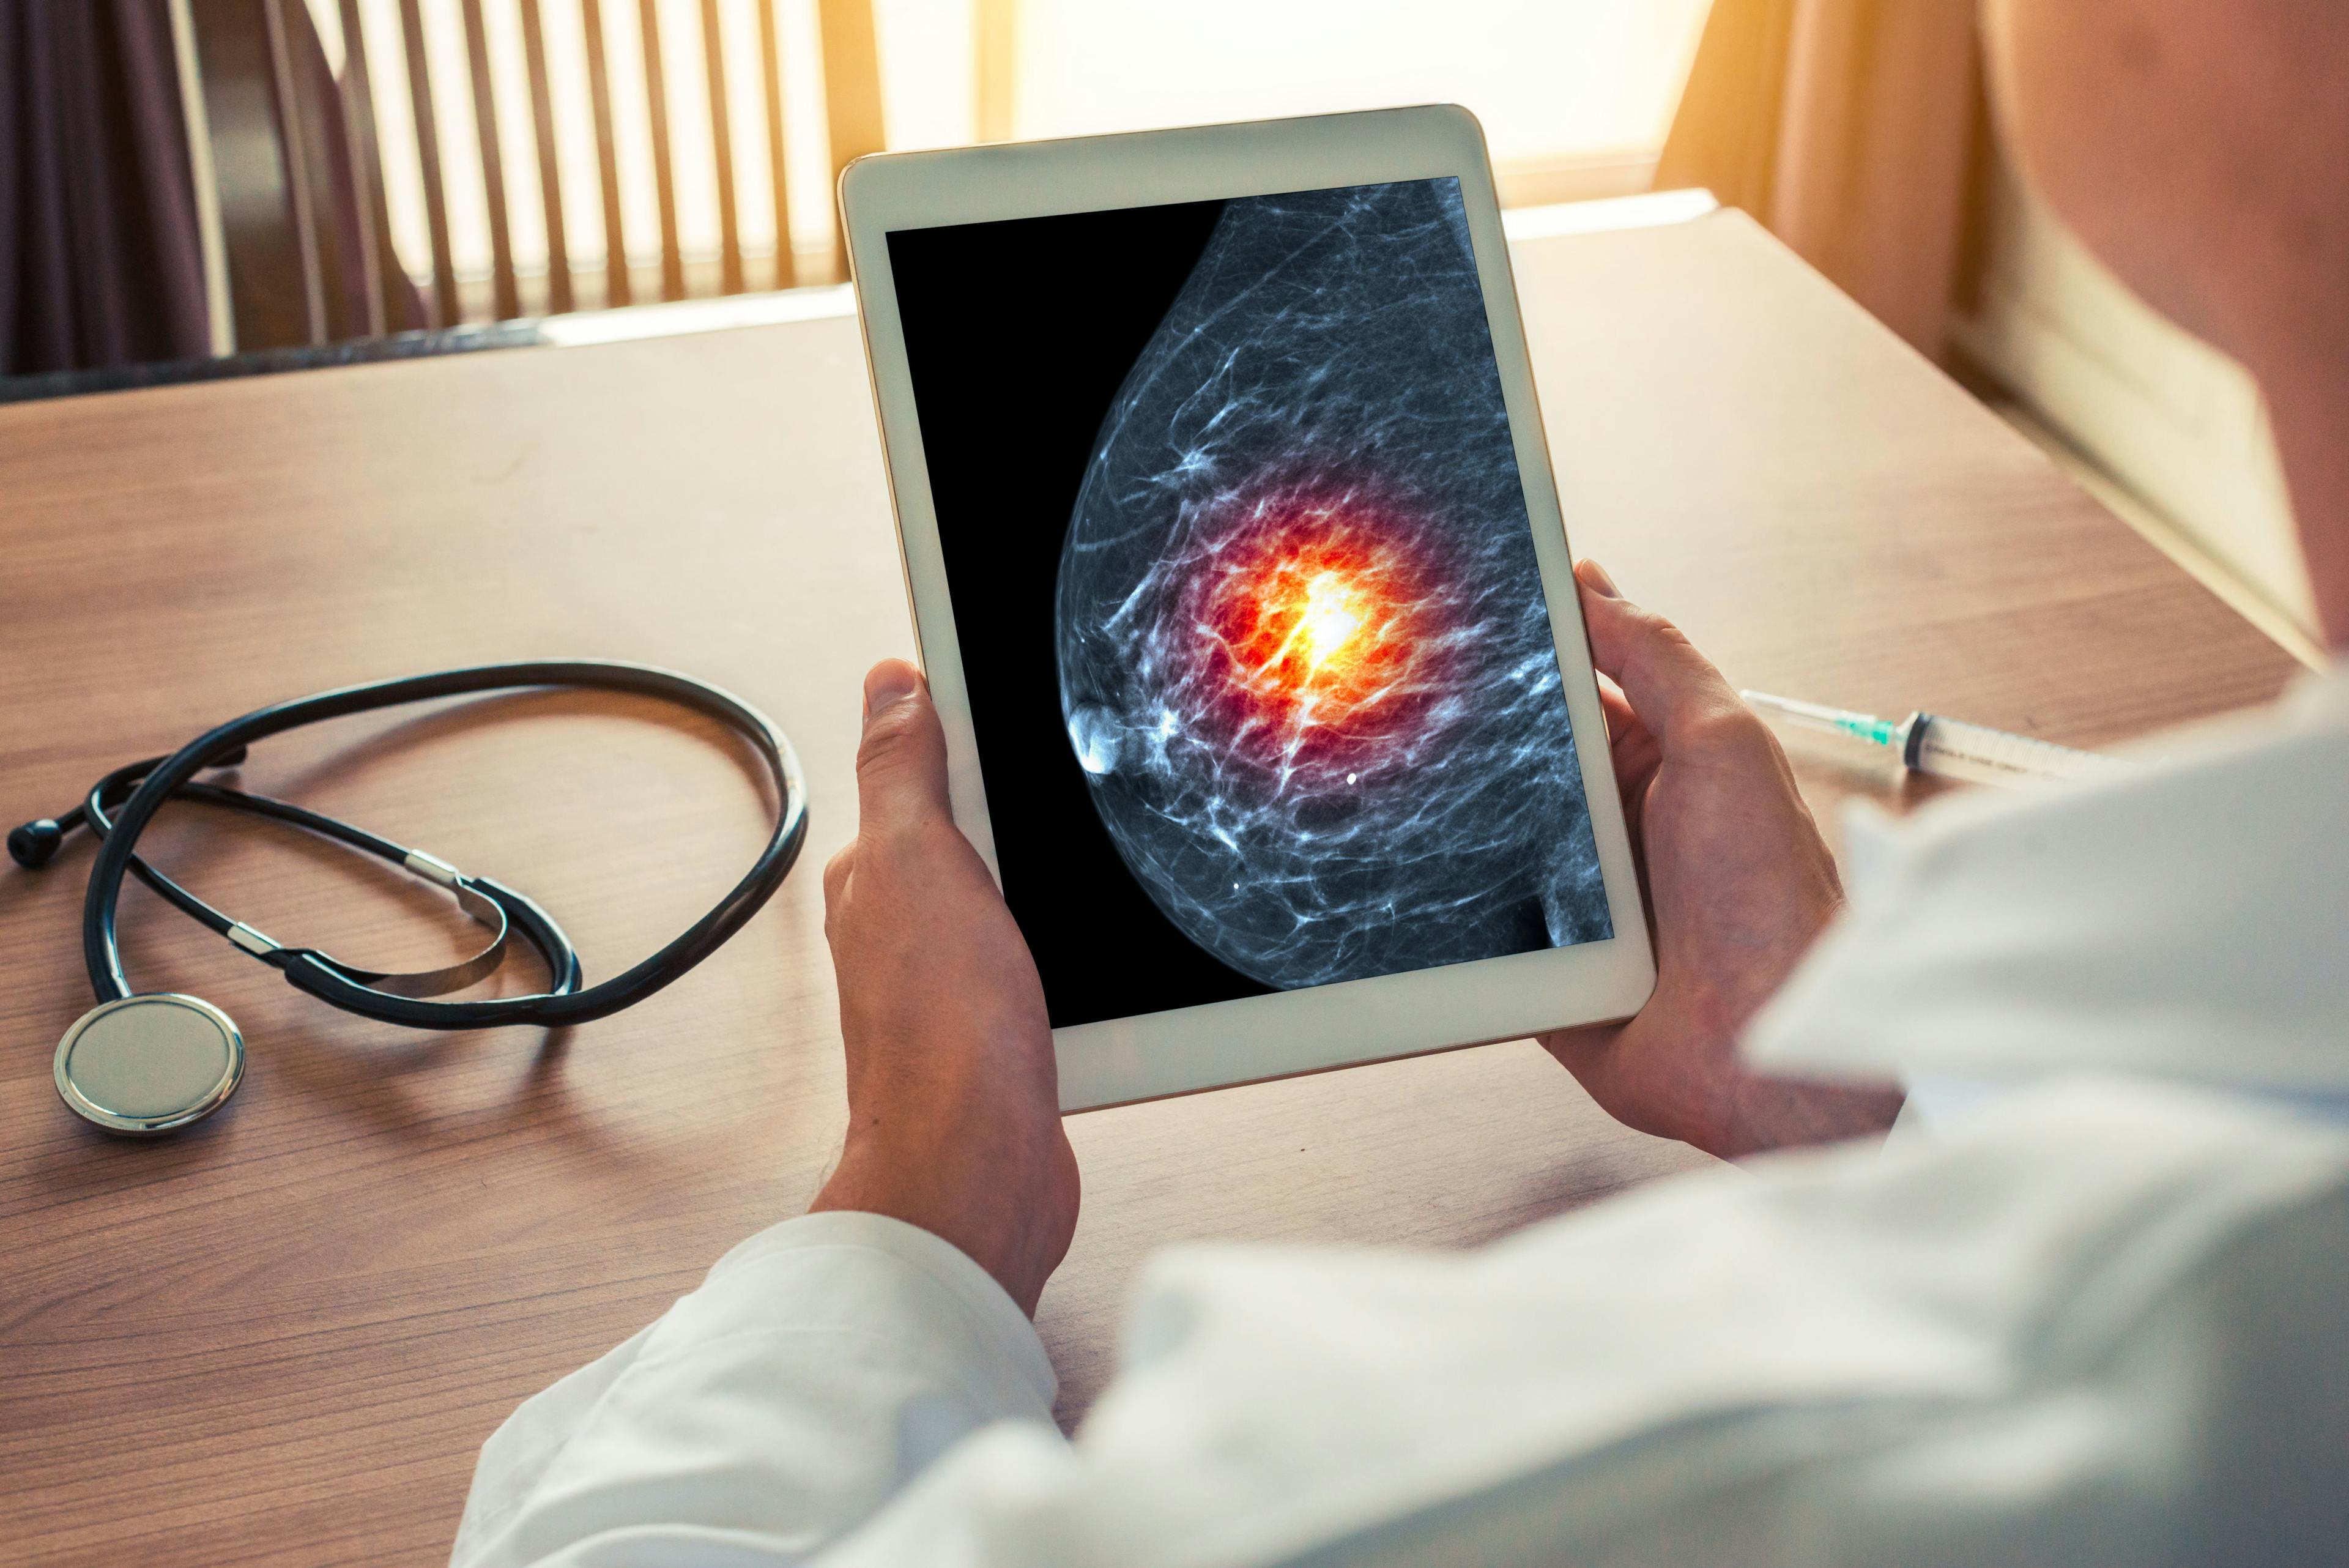 Doctor holding a digital tablet with x-ray mammogram / Steph Photographies - stock.adobe.com